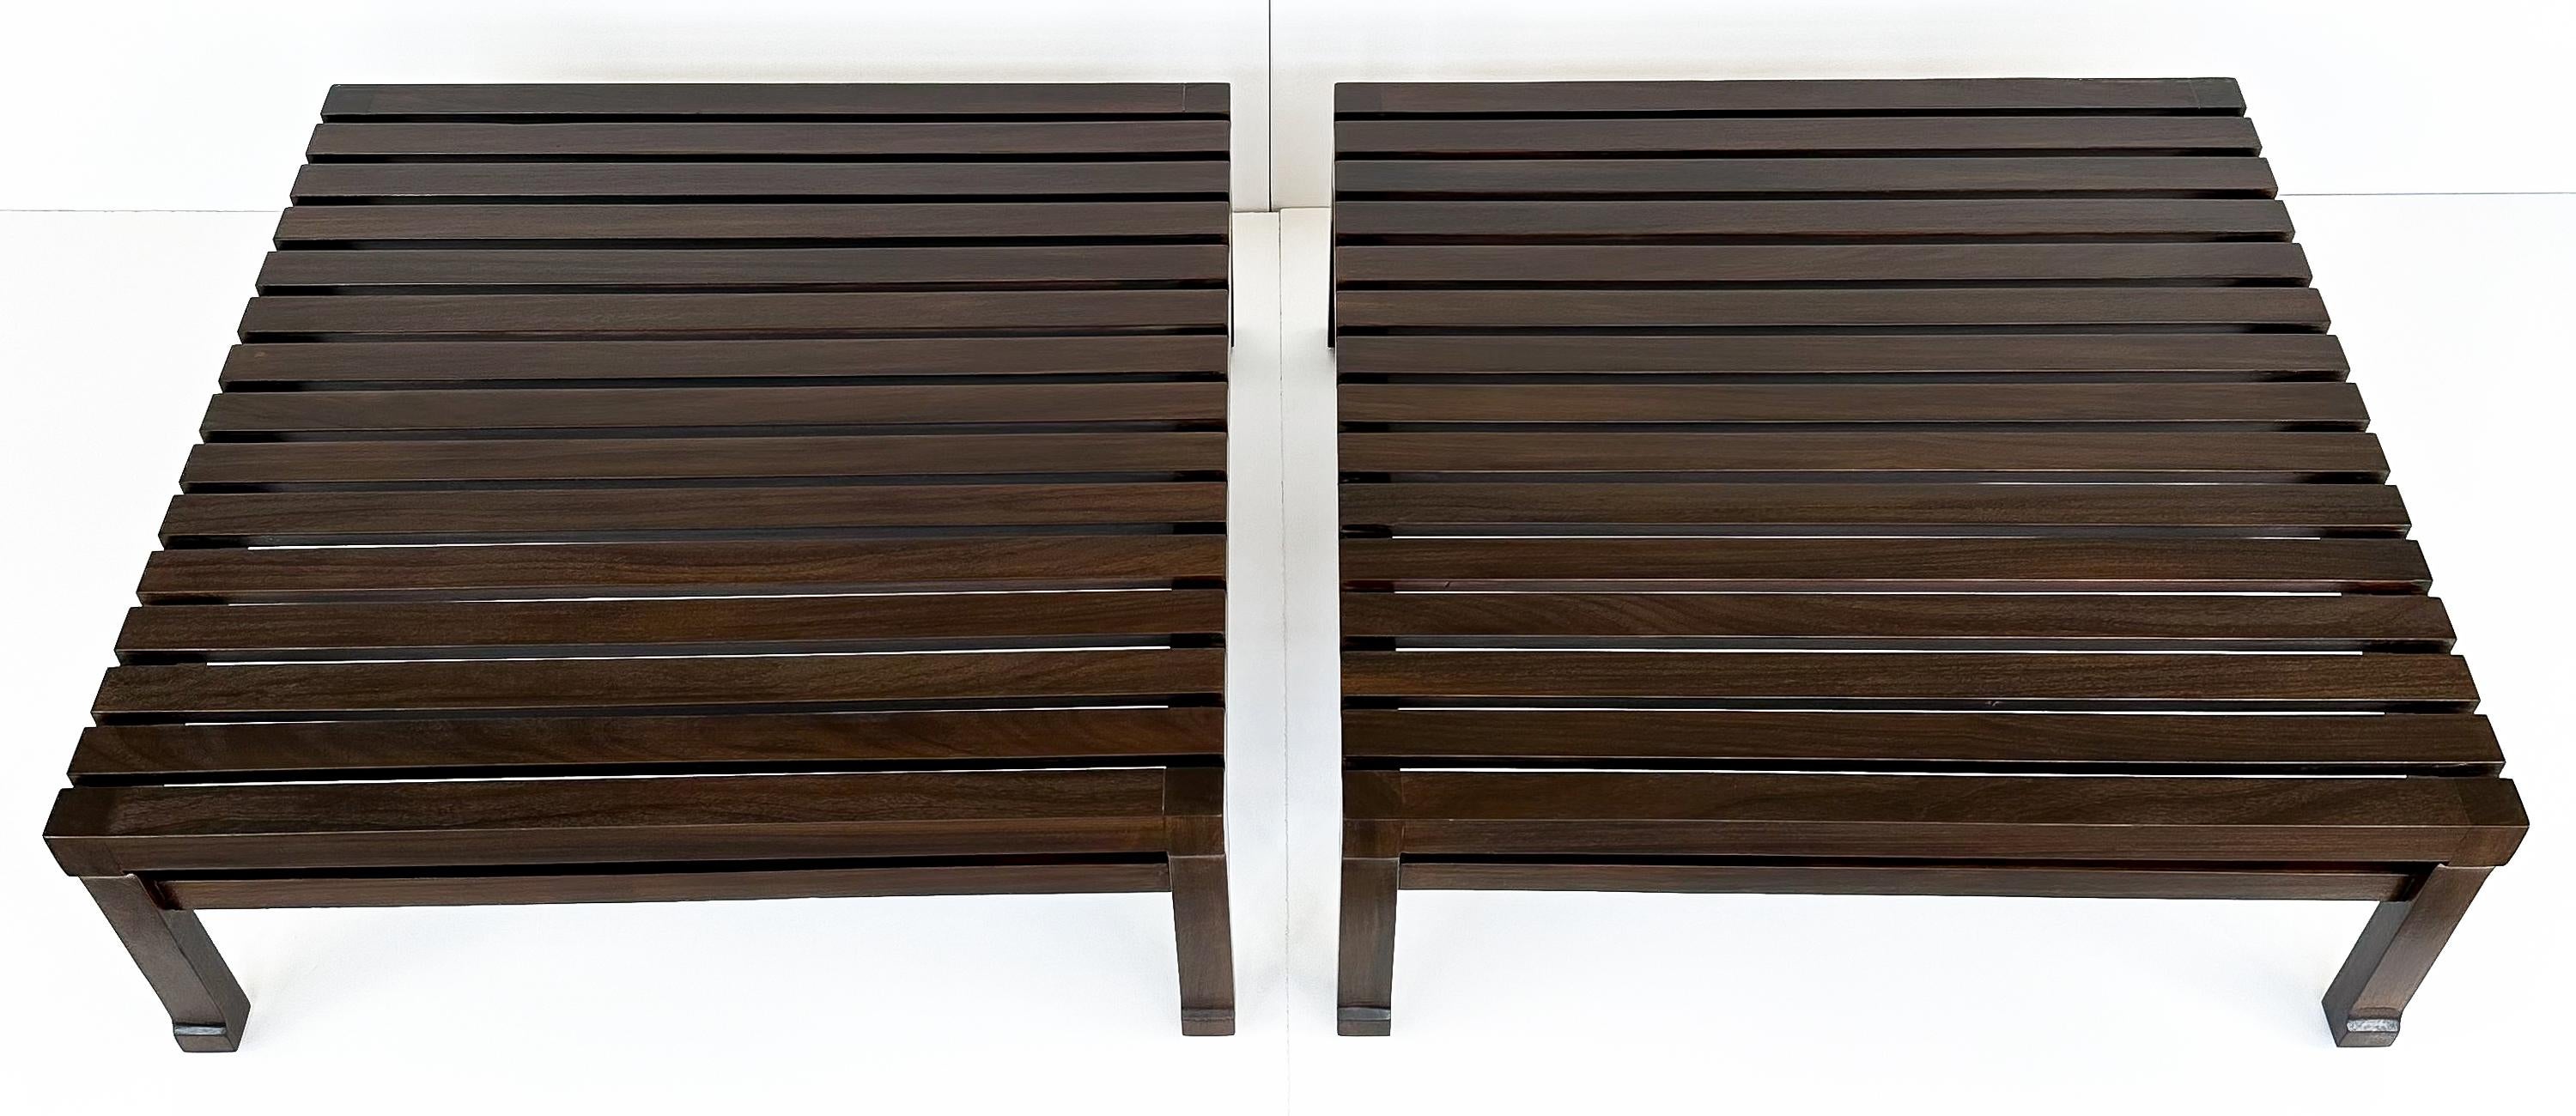 Indulge yourself in the timeless appeal of Italian design with this versatile pair of low slatted tables from the 1970s. Perfect as individual end tables or combined to form a modern coffee table, this pair embodies both elegance and functionality,